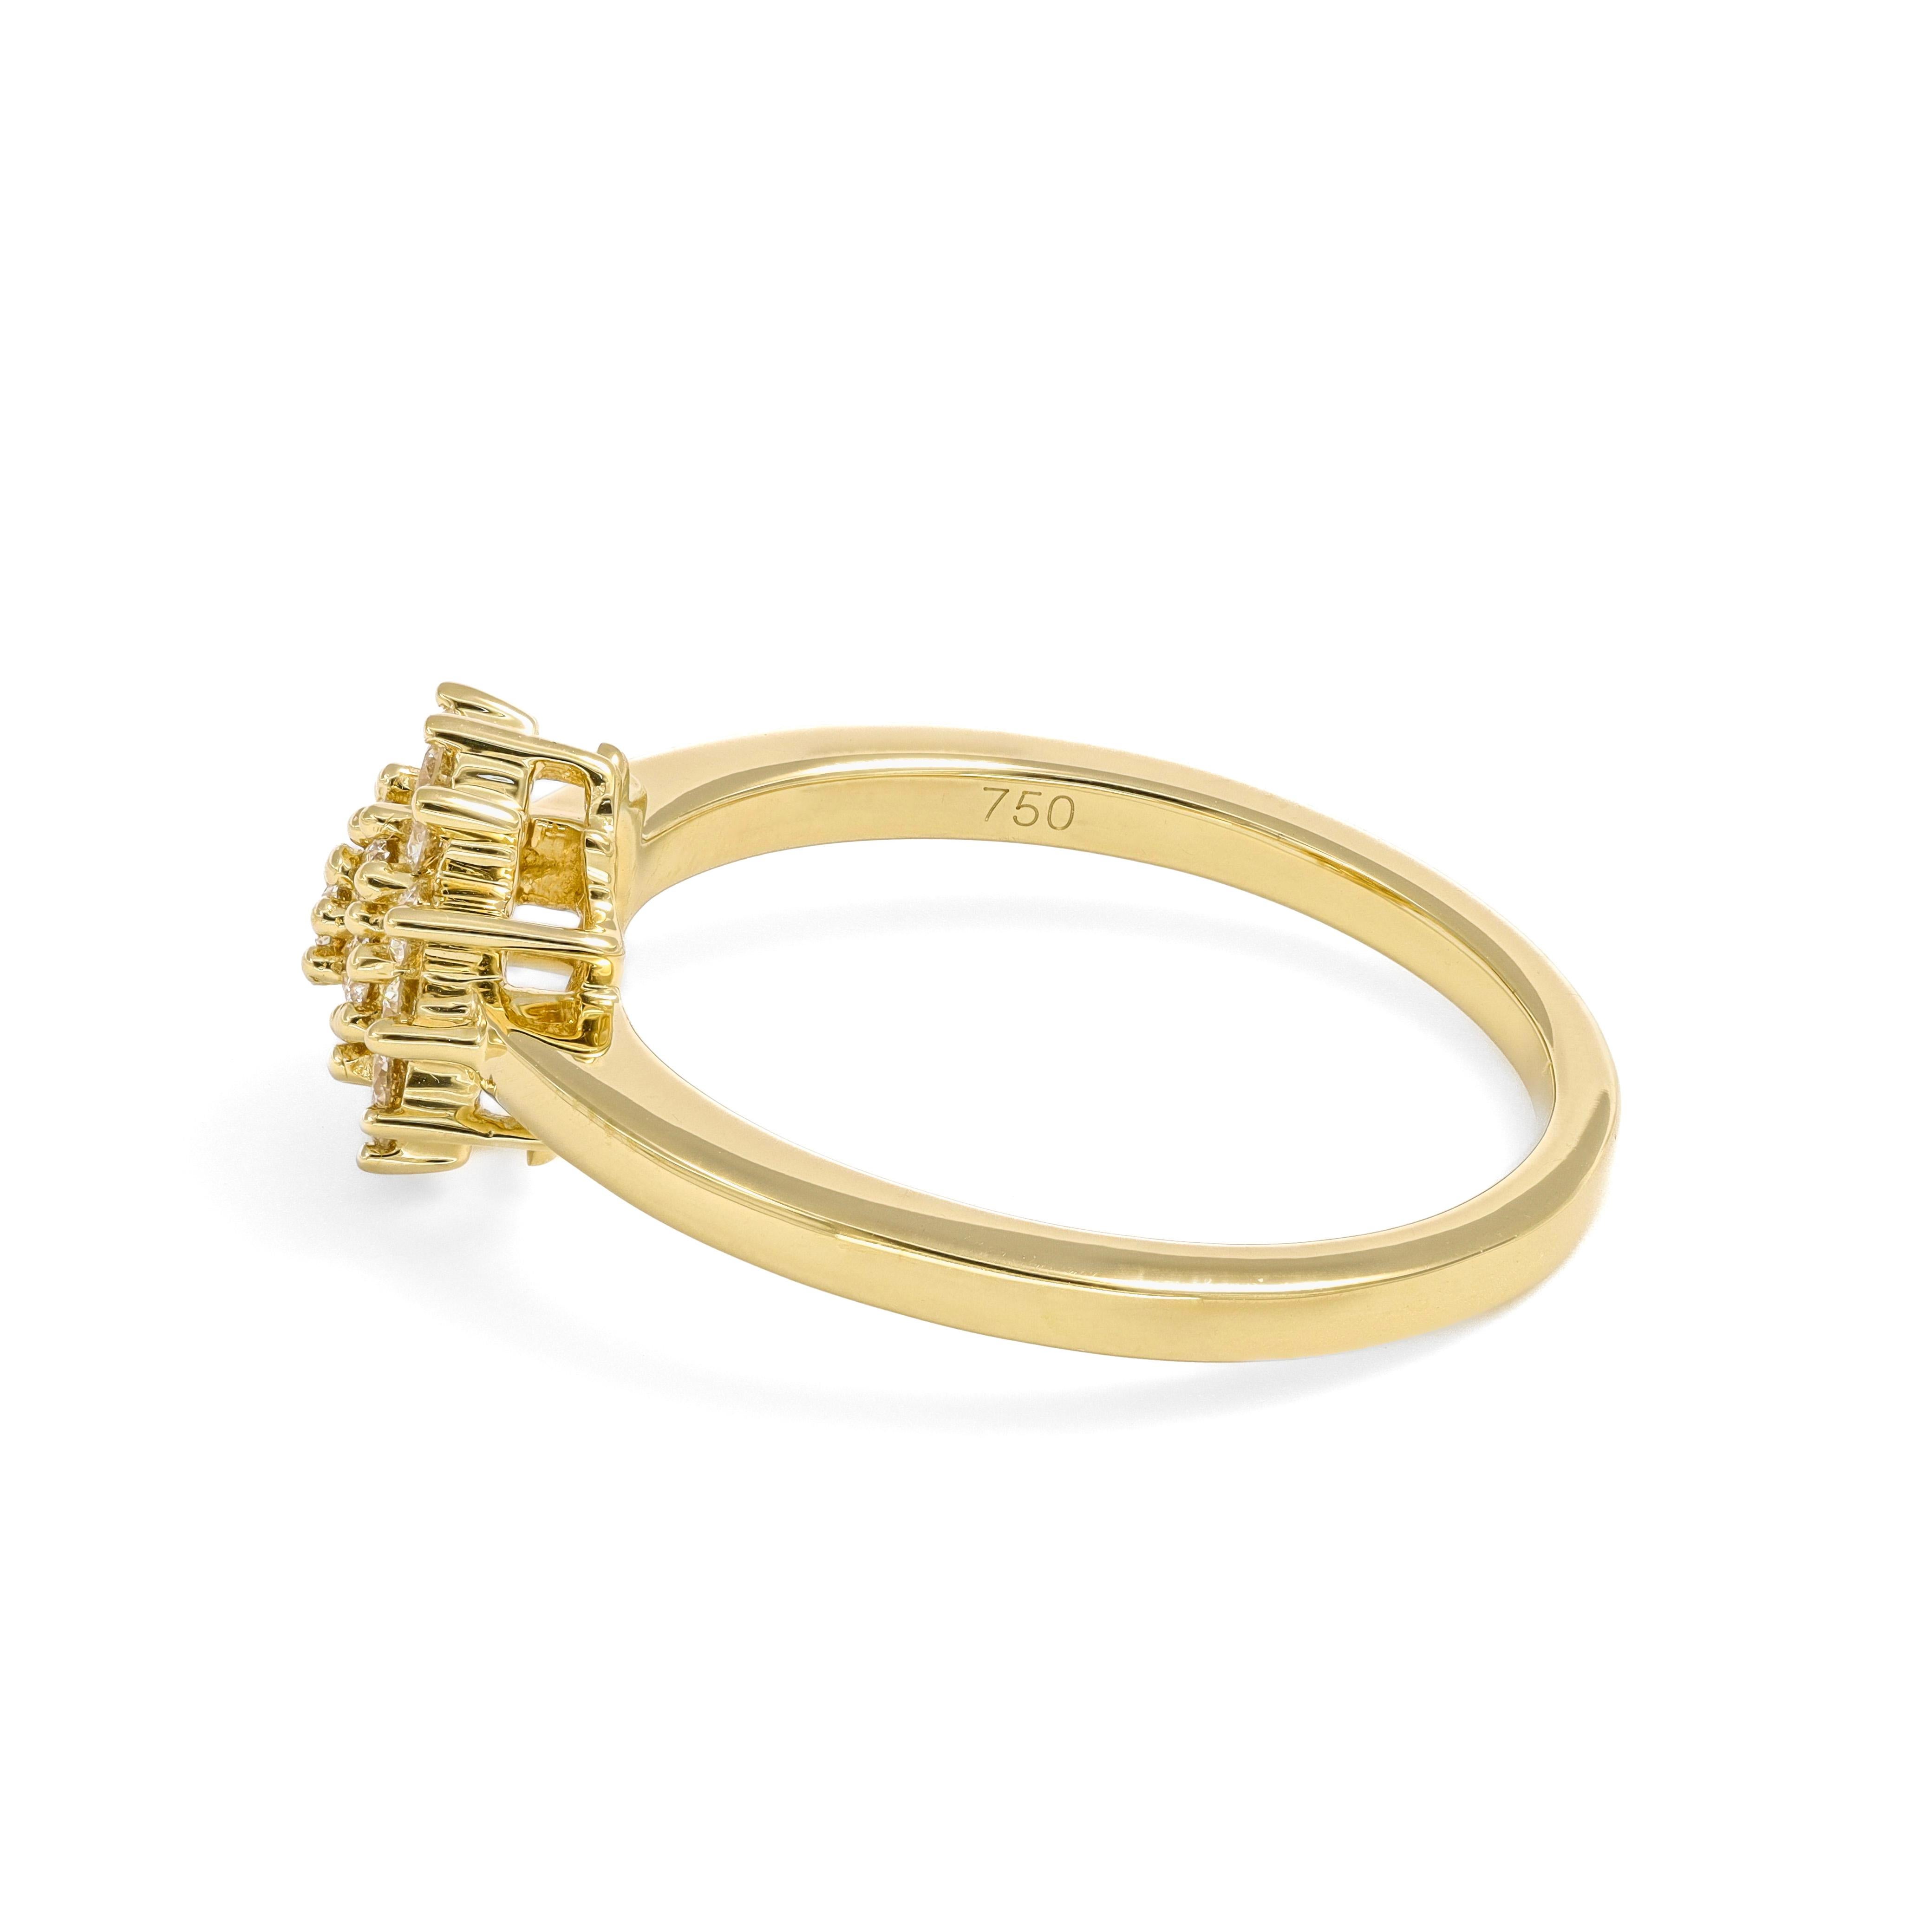 Crafted from exquisite 18-Karat Yellow gold, the Cluster Star Ring is a radiant masterpiece that seamlessly blends sophistication with celestial charm. 

The ring features a star-shaped cluster design adorned with a total of 0.30 Carats of natural